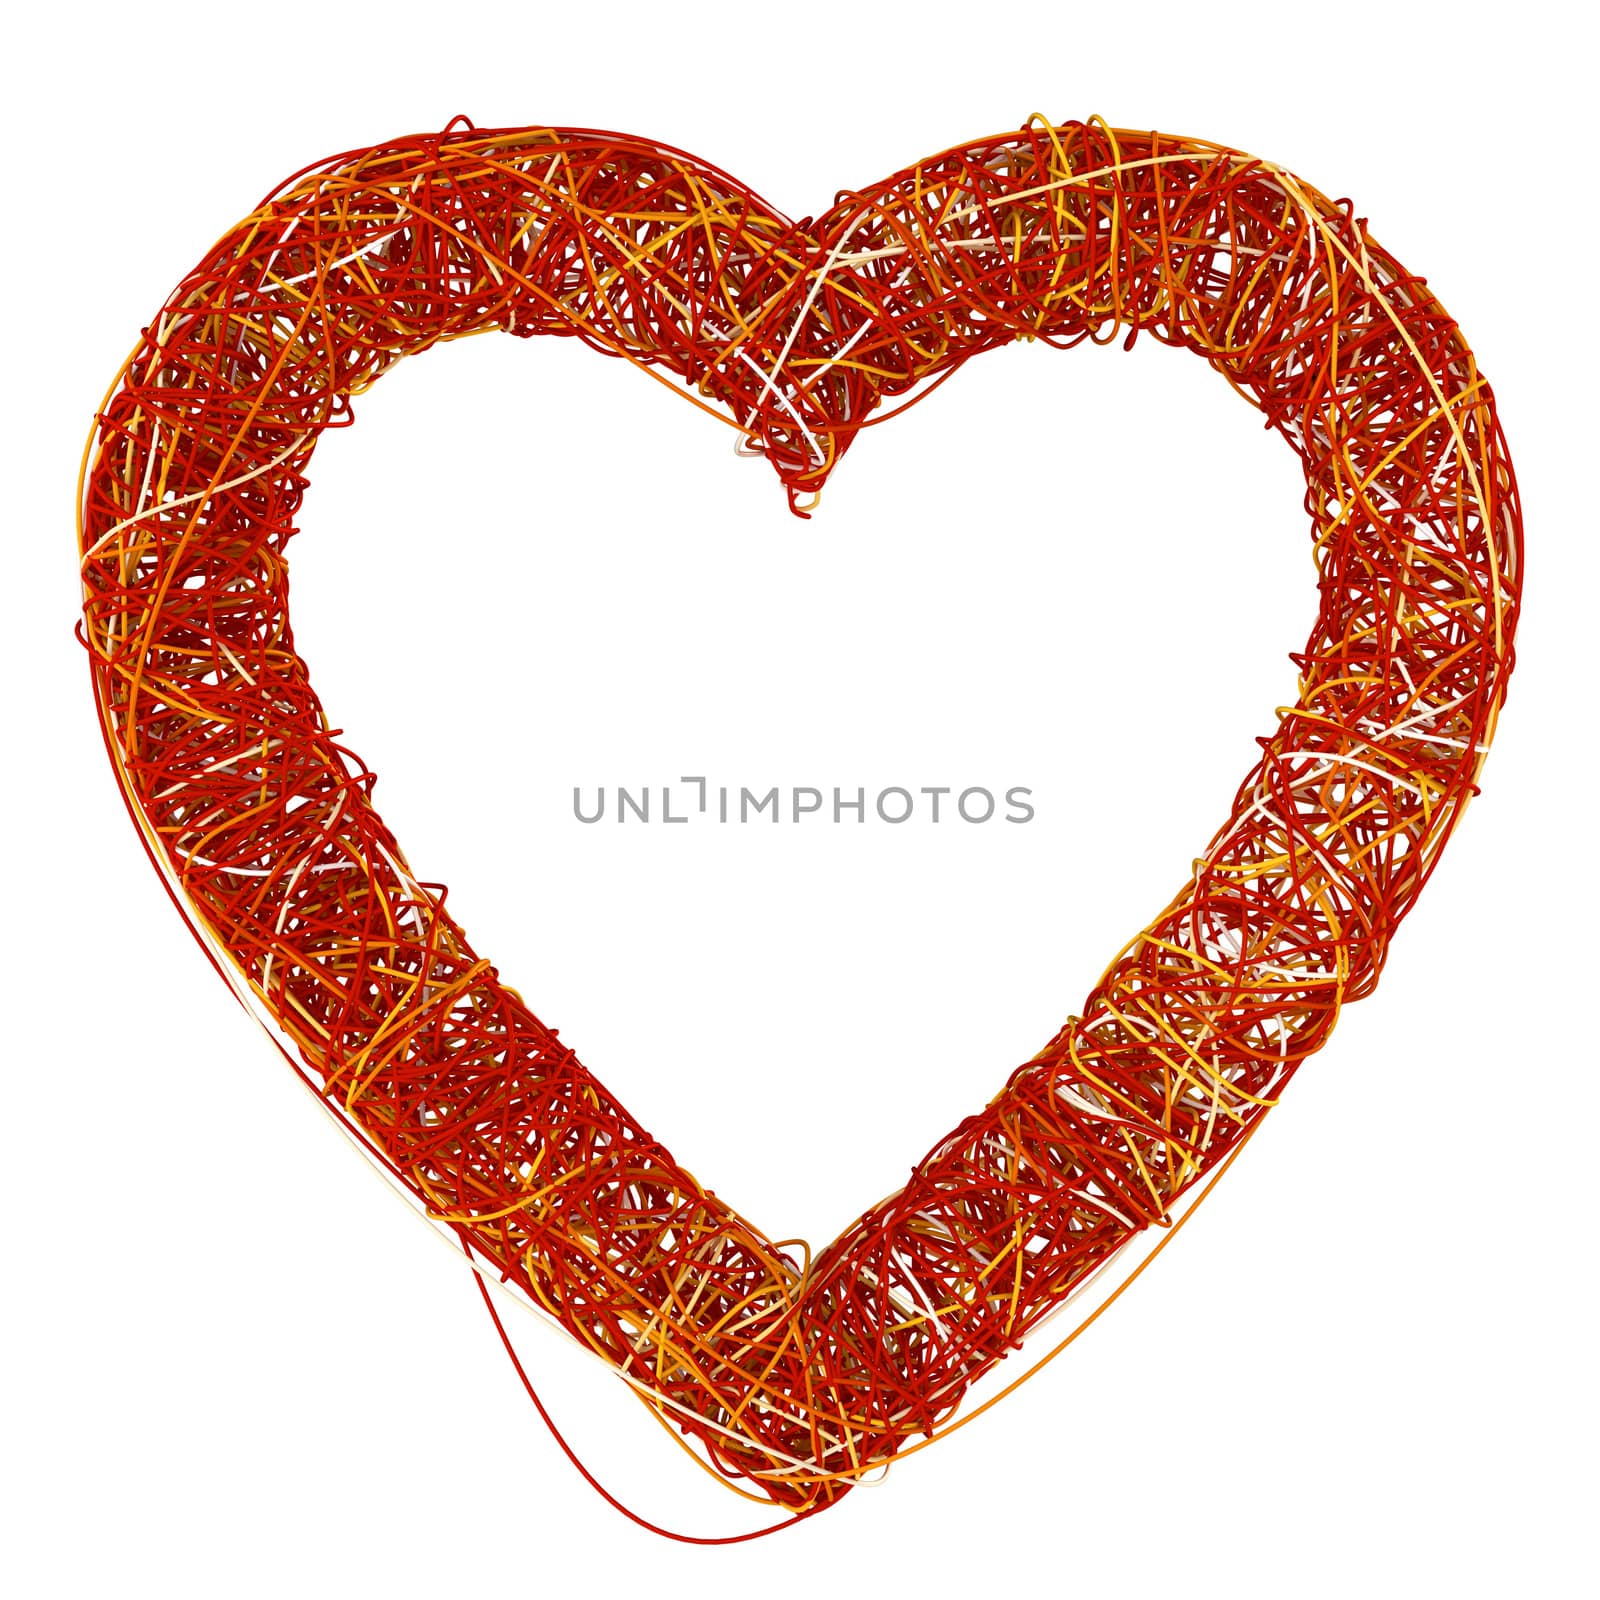 Big Red Heart Made of Fibre, Isolated On White Background, 3D Rende